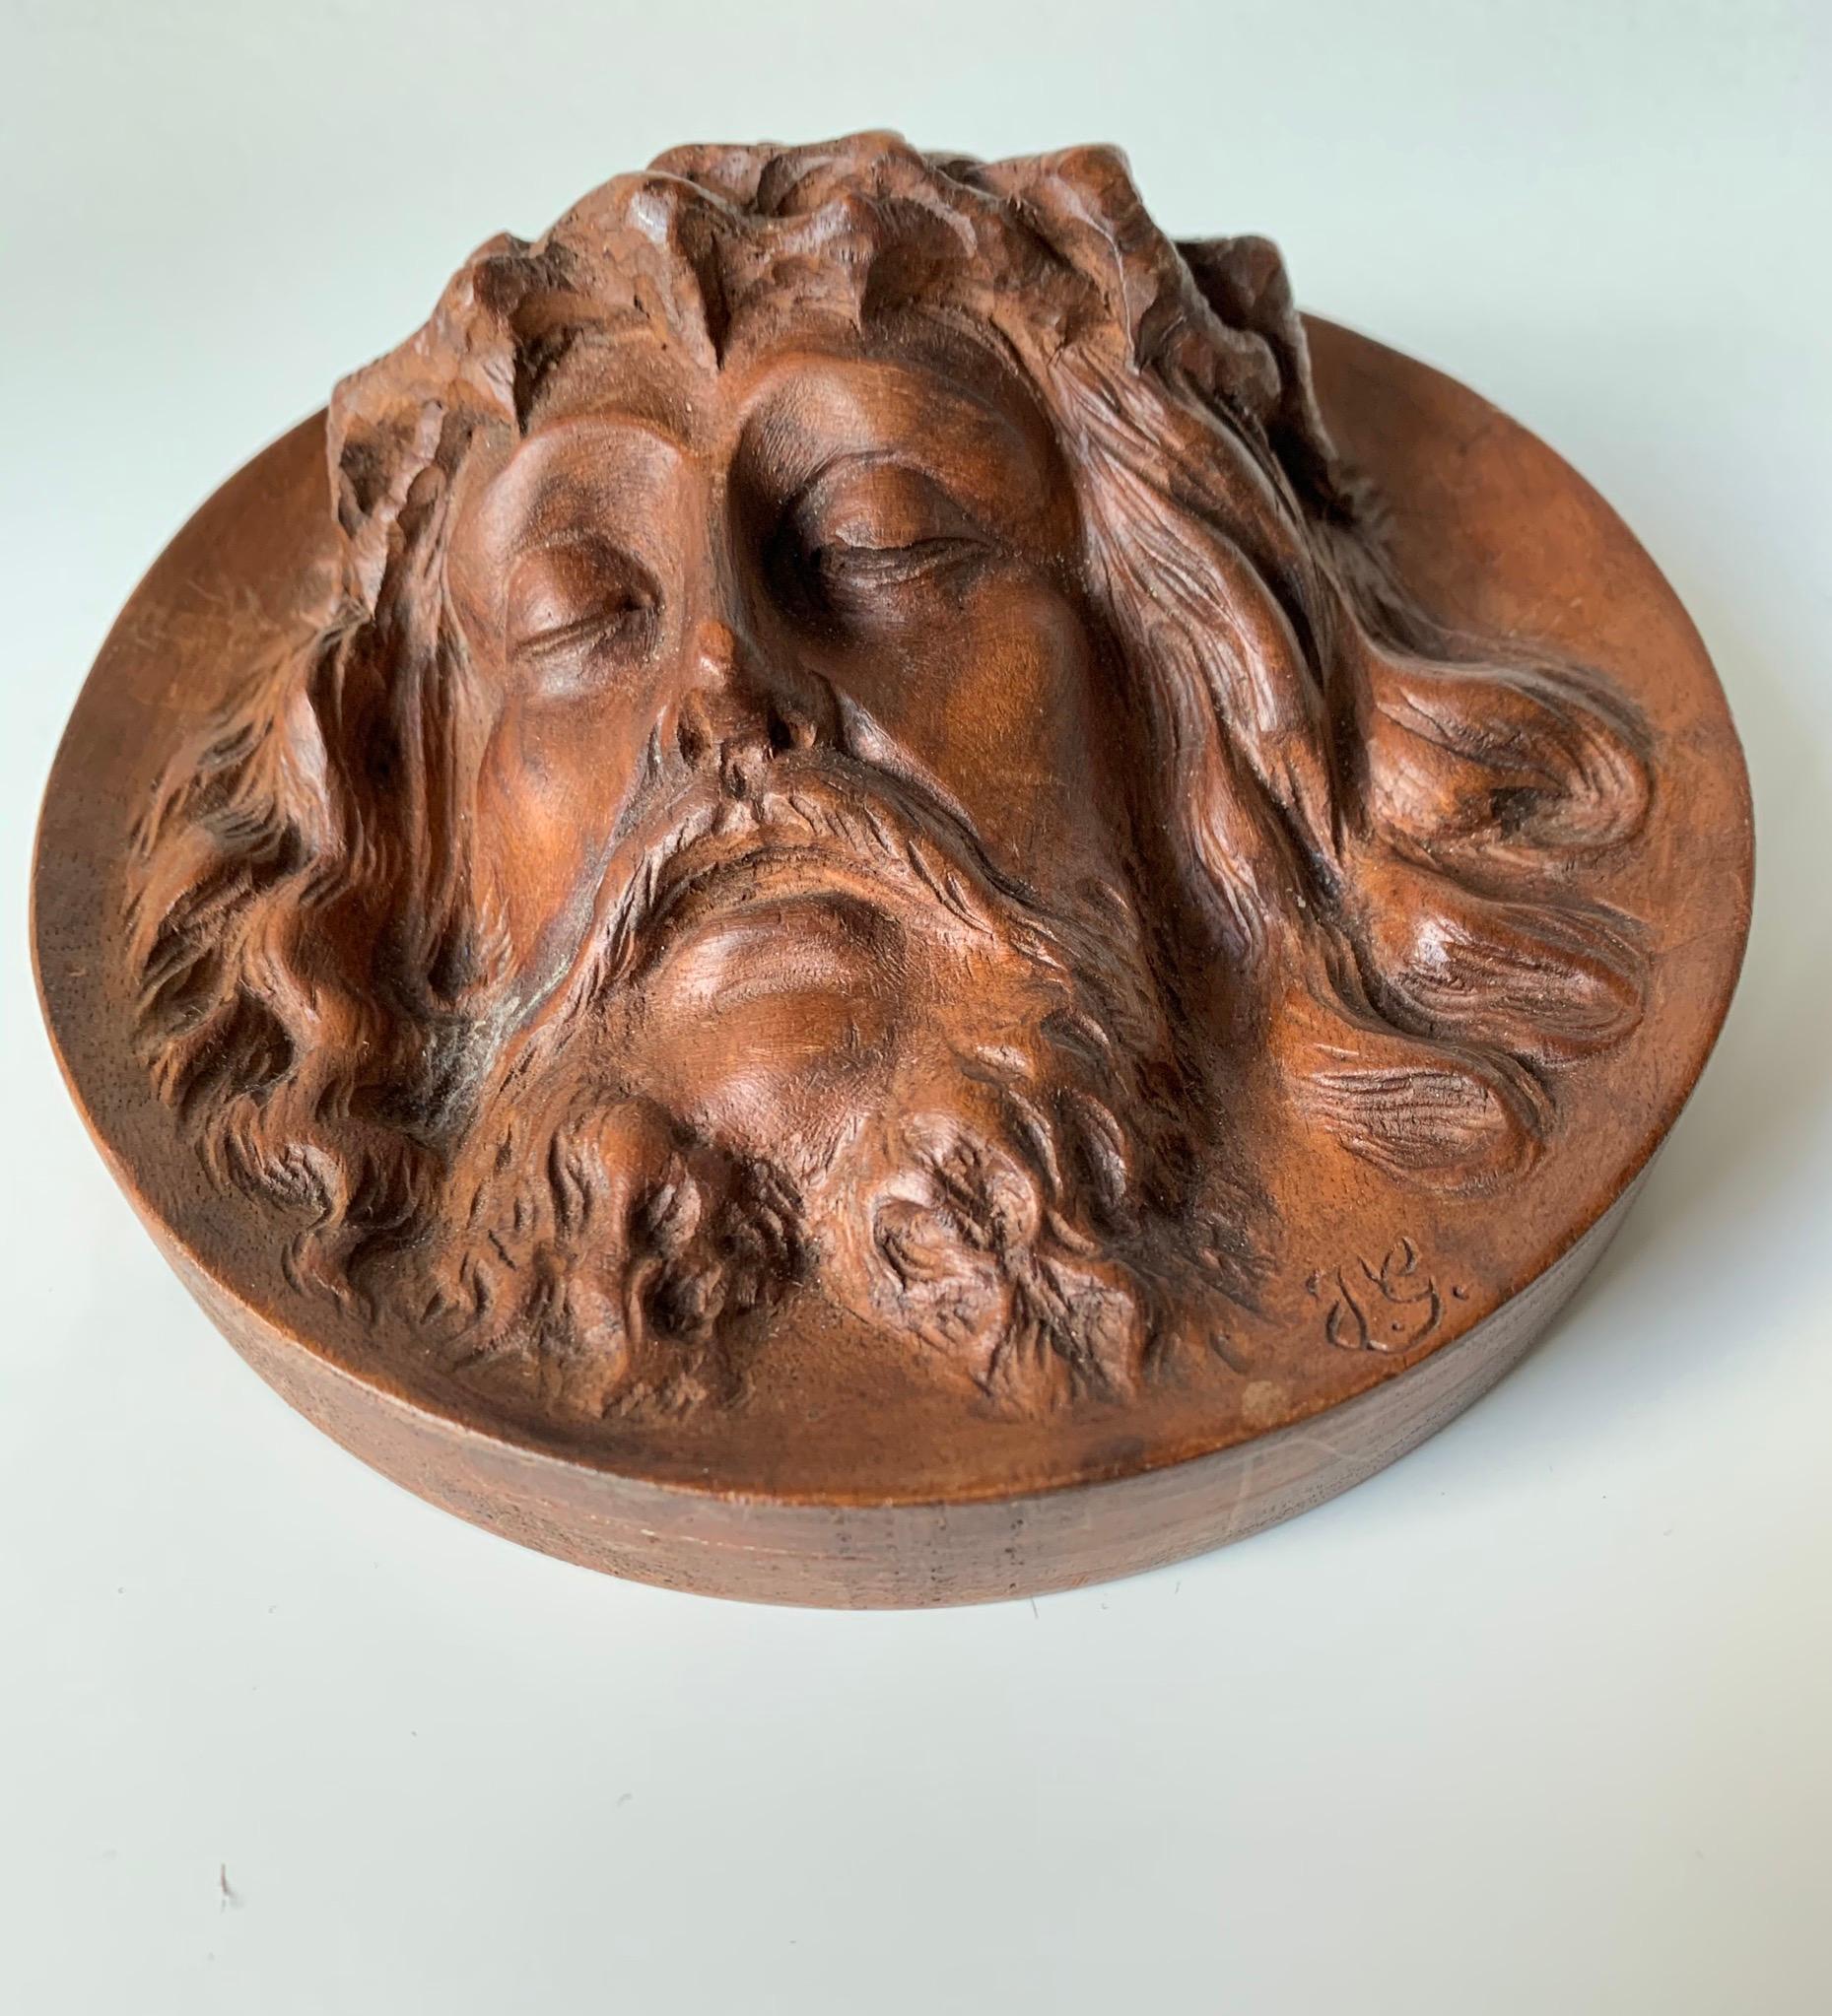 Antique and marvelously hand carved, work of religious art in deep relief.

Anyone who is capable of creating such a detailed and expressive face of our Lord Jesus out of a wooden plaque of this size, in our view, truly is a master carver. The